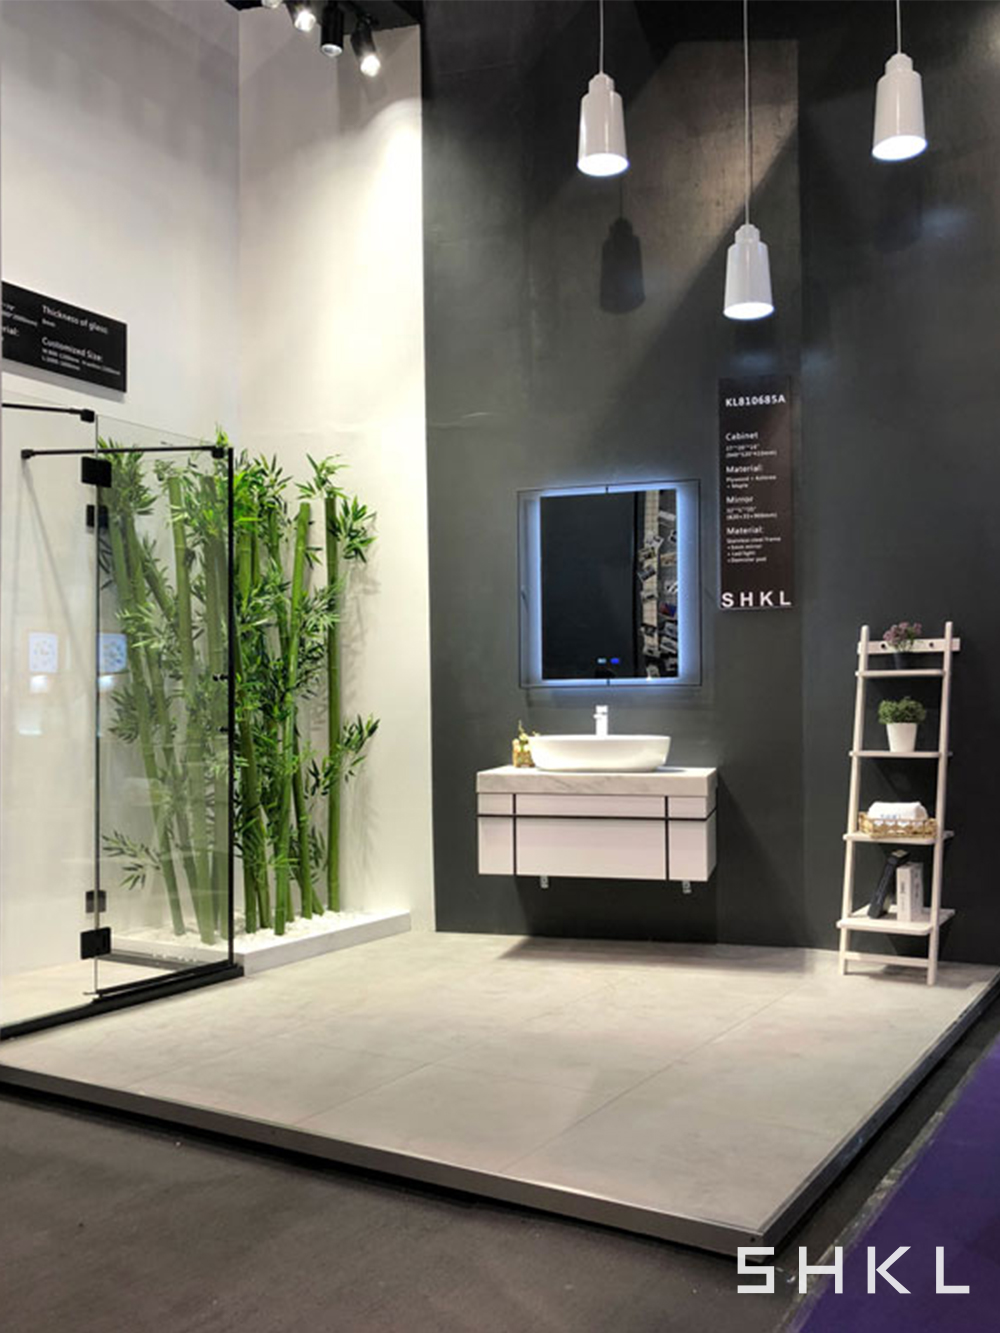 KBIS 2019, SHKL participated KBIS for the third time 4